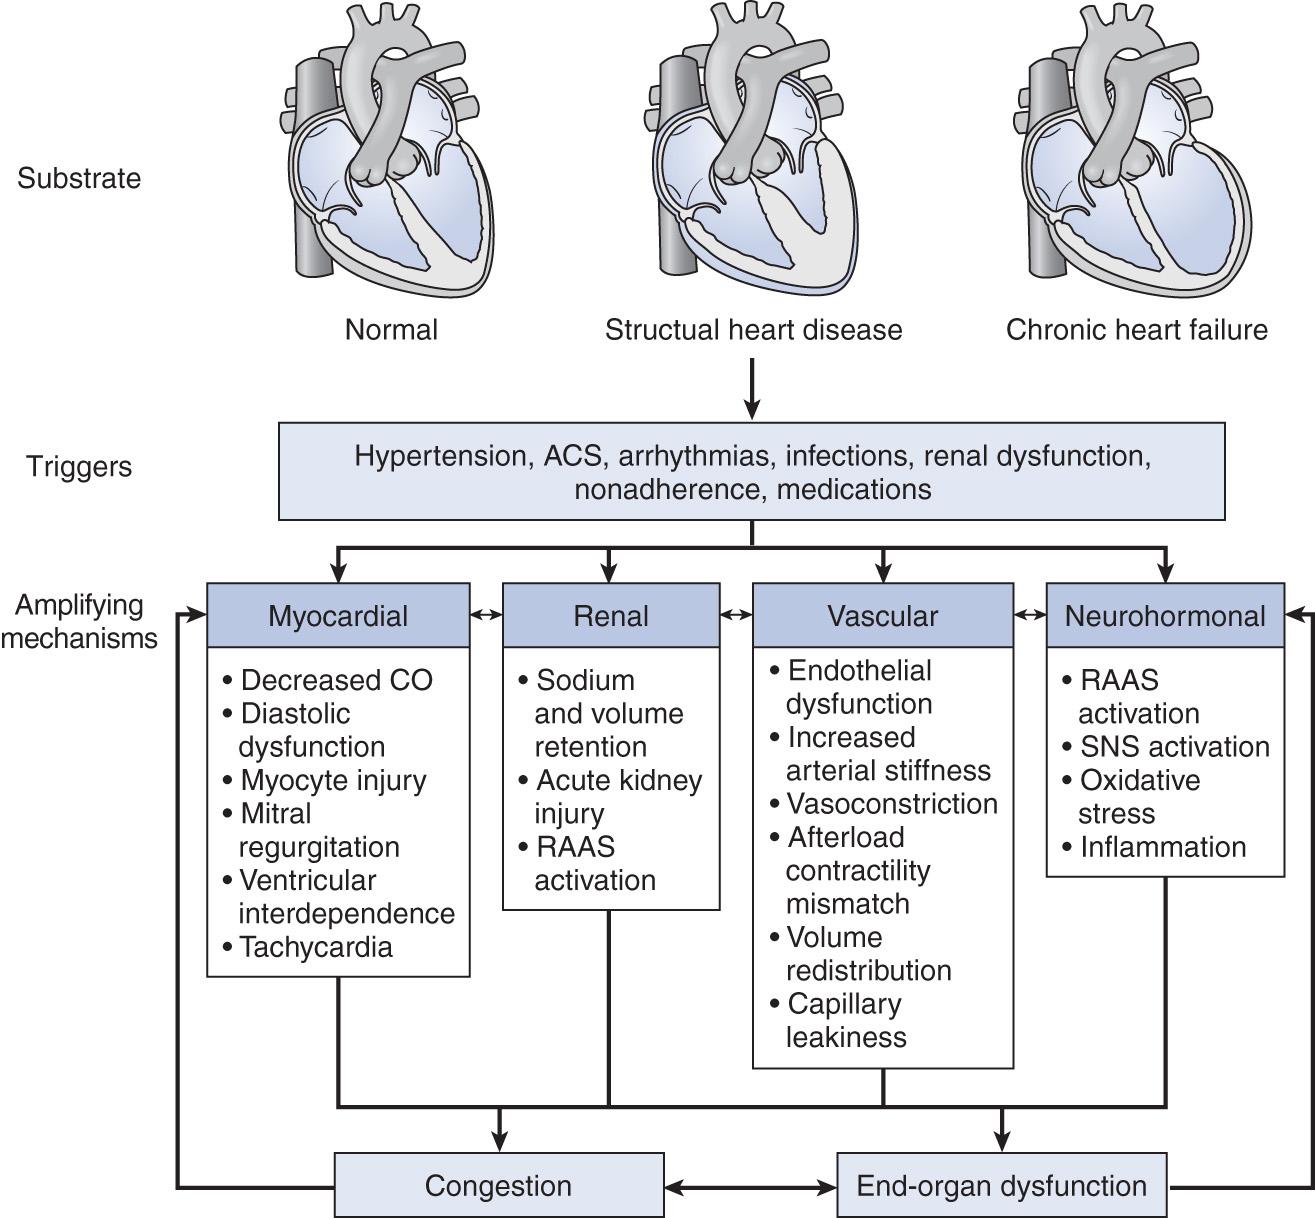 Fig. 26.1, A schematic representation of the pathophysiology of acute heart failure. ACS , Acute coronary syndrome; CO , cardiac output; RAAS , renin-angiotensin-aldosterone system; SNS , sympathetic nervous system.